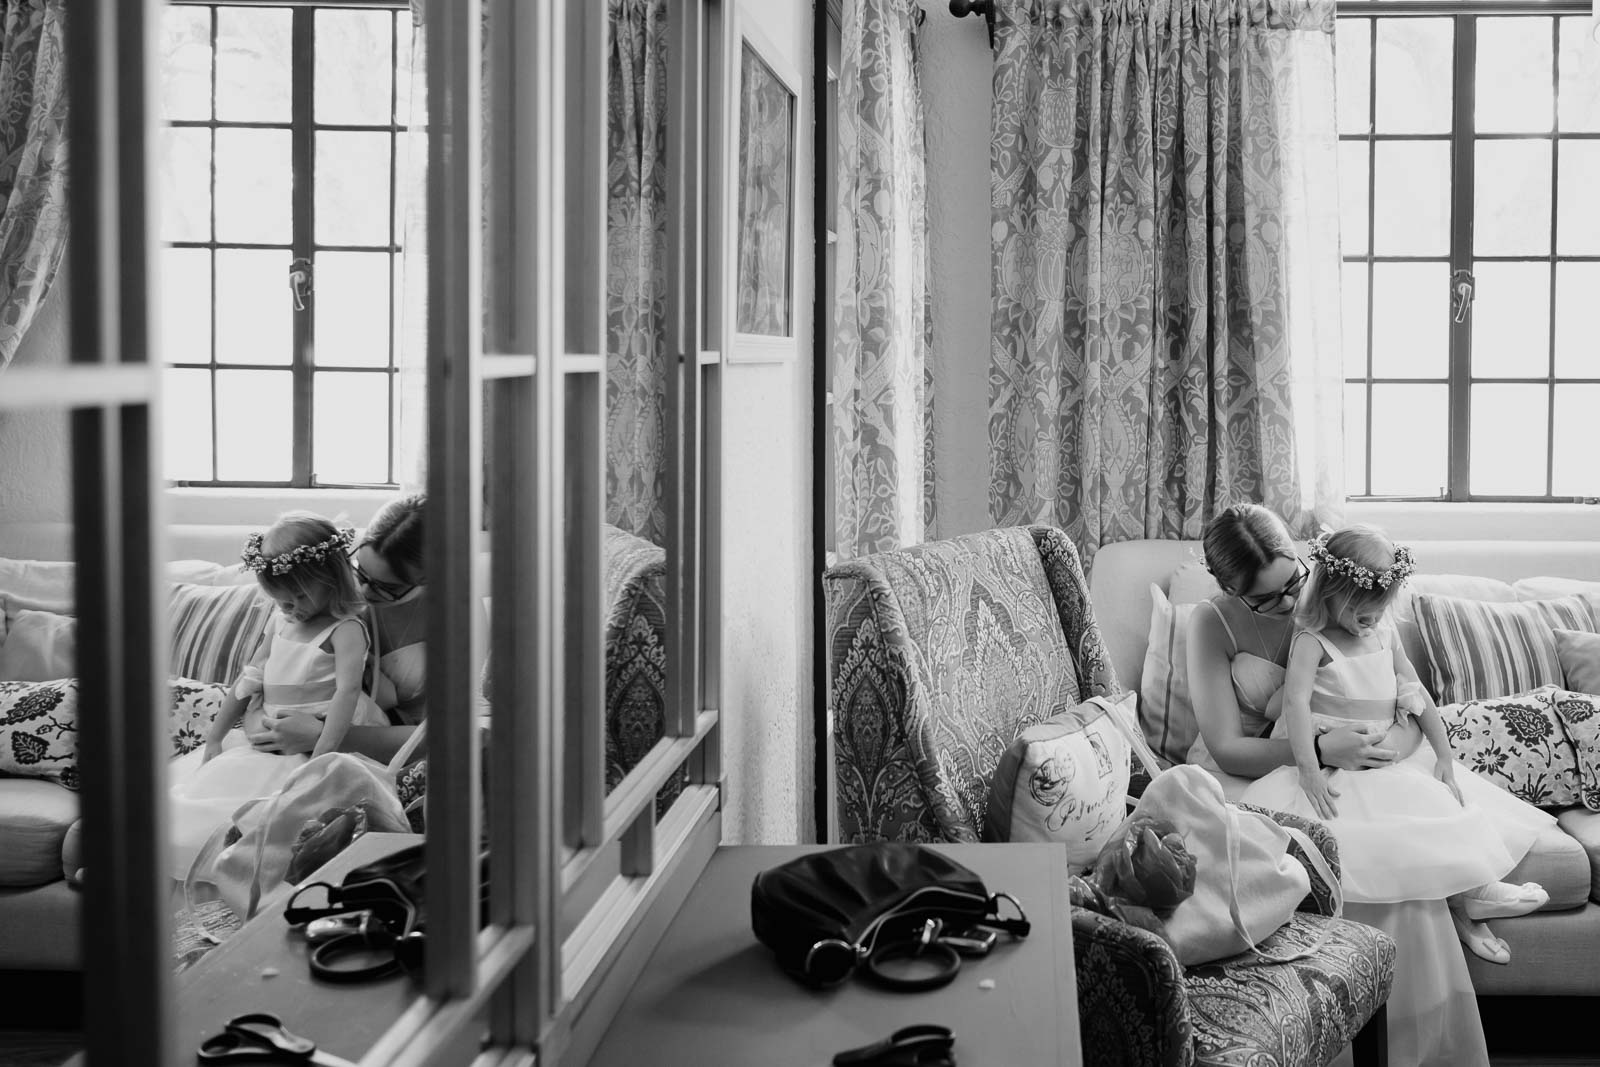 In a mirrored photo two young bridesmaids cuddle on the sofa at the veranda